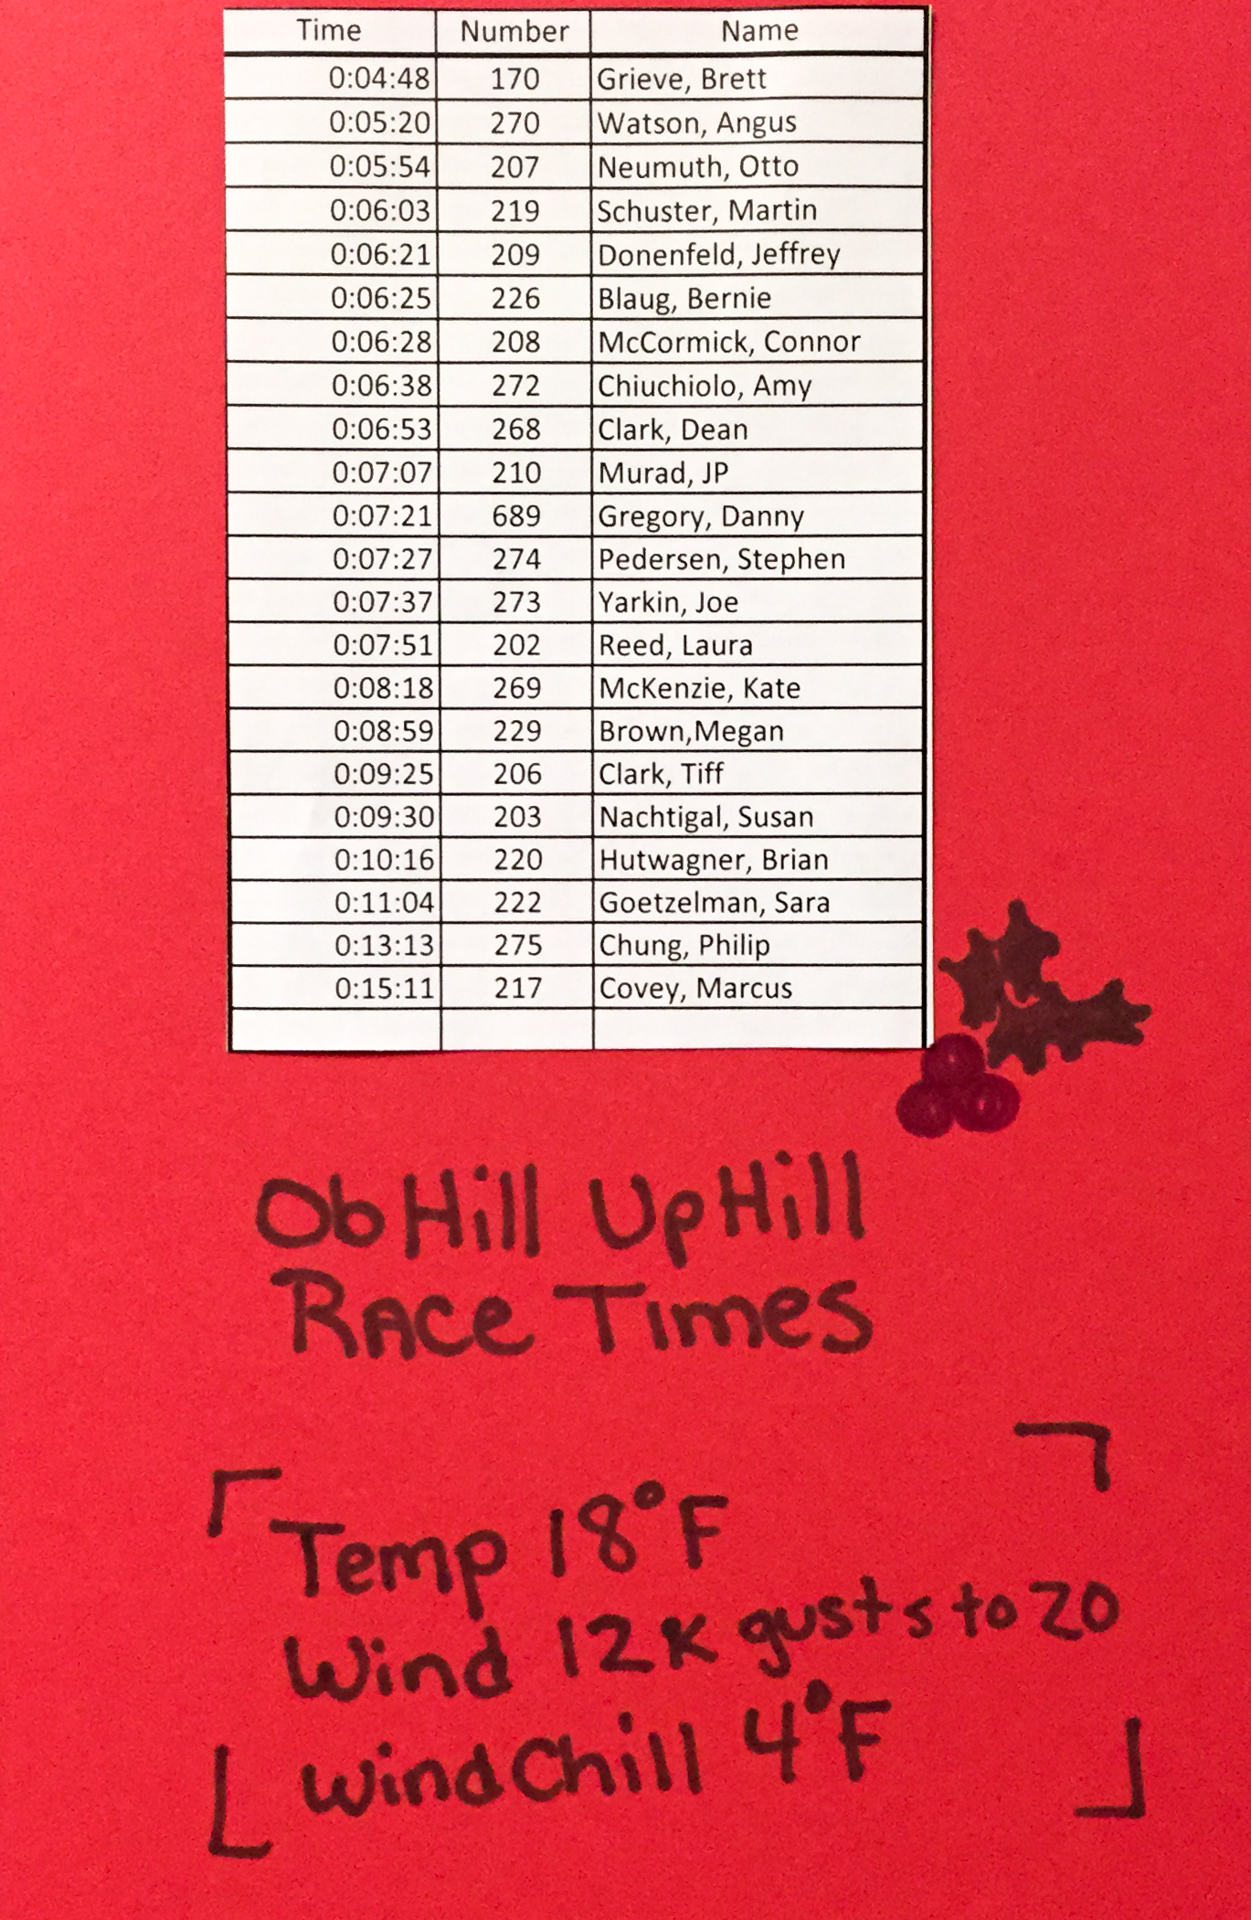 Ob Hill Uphill Race Times. I finished in 6:21, #5. Behind Otto again!